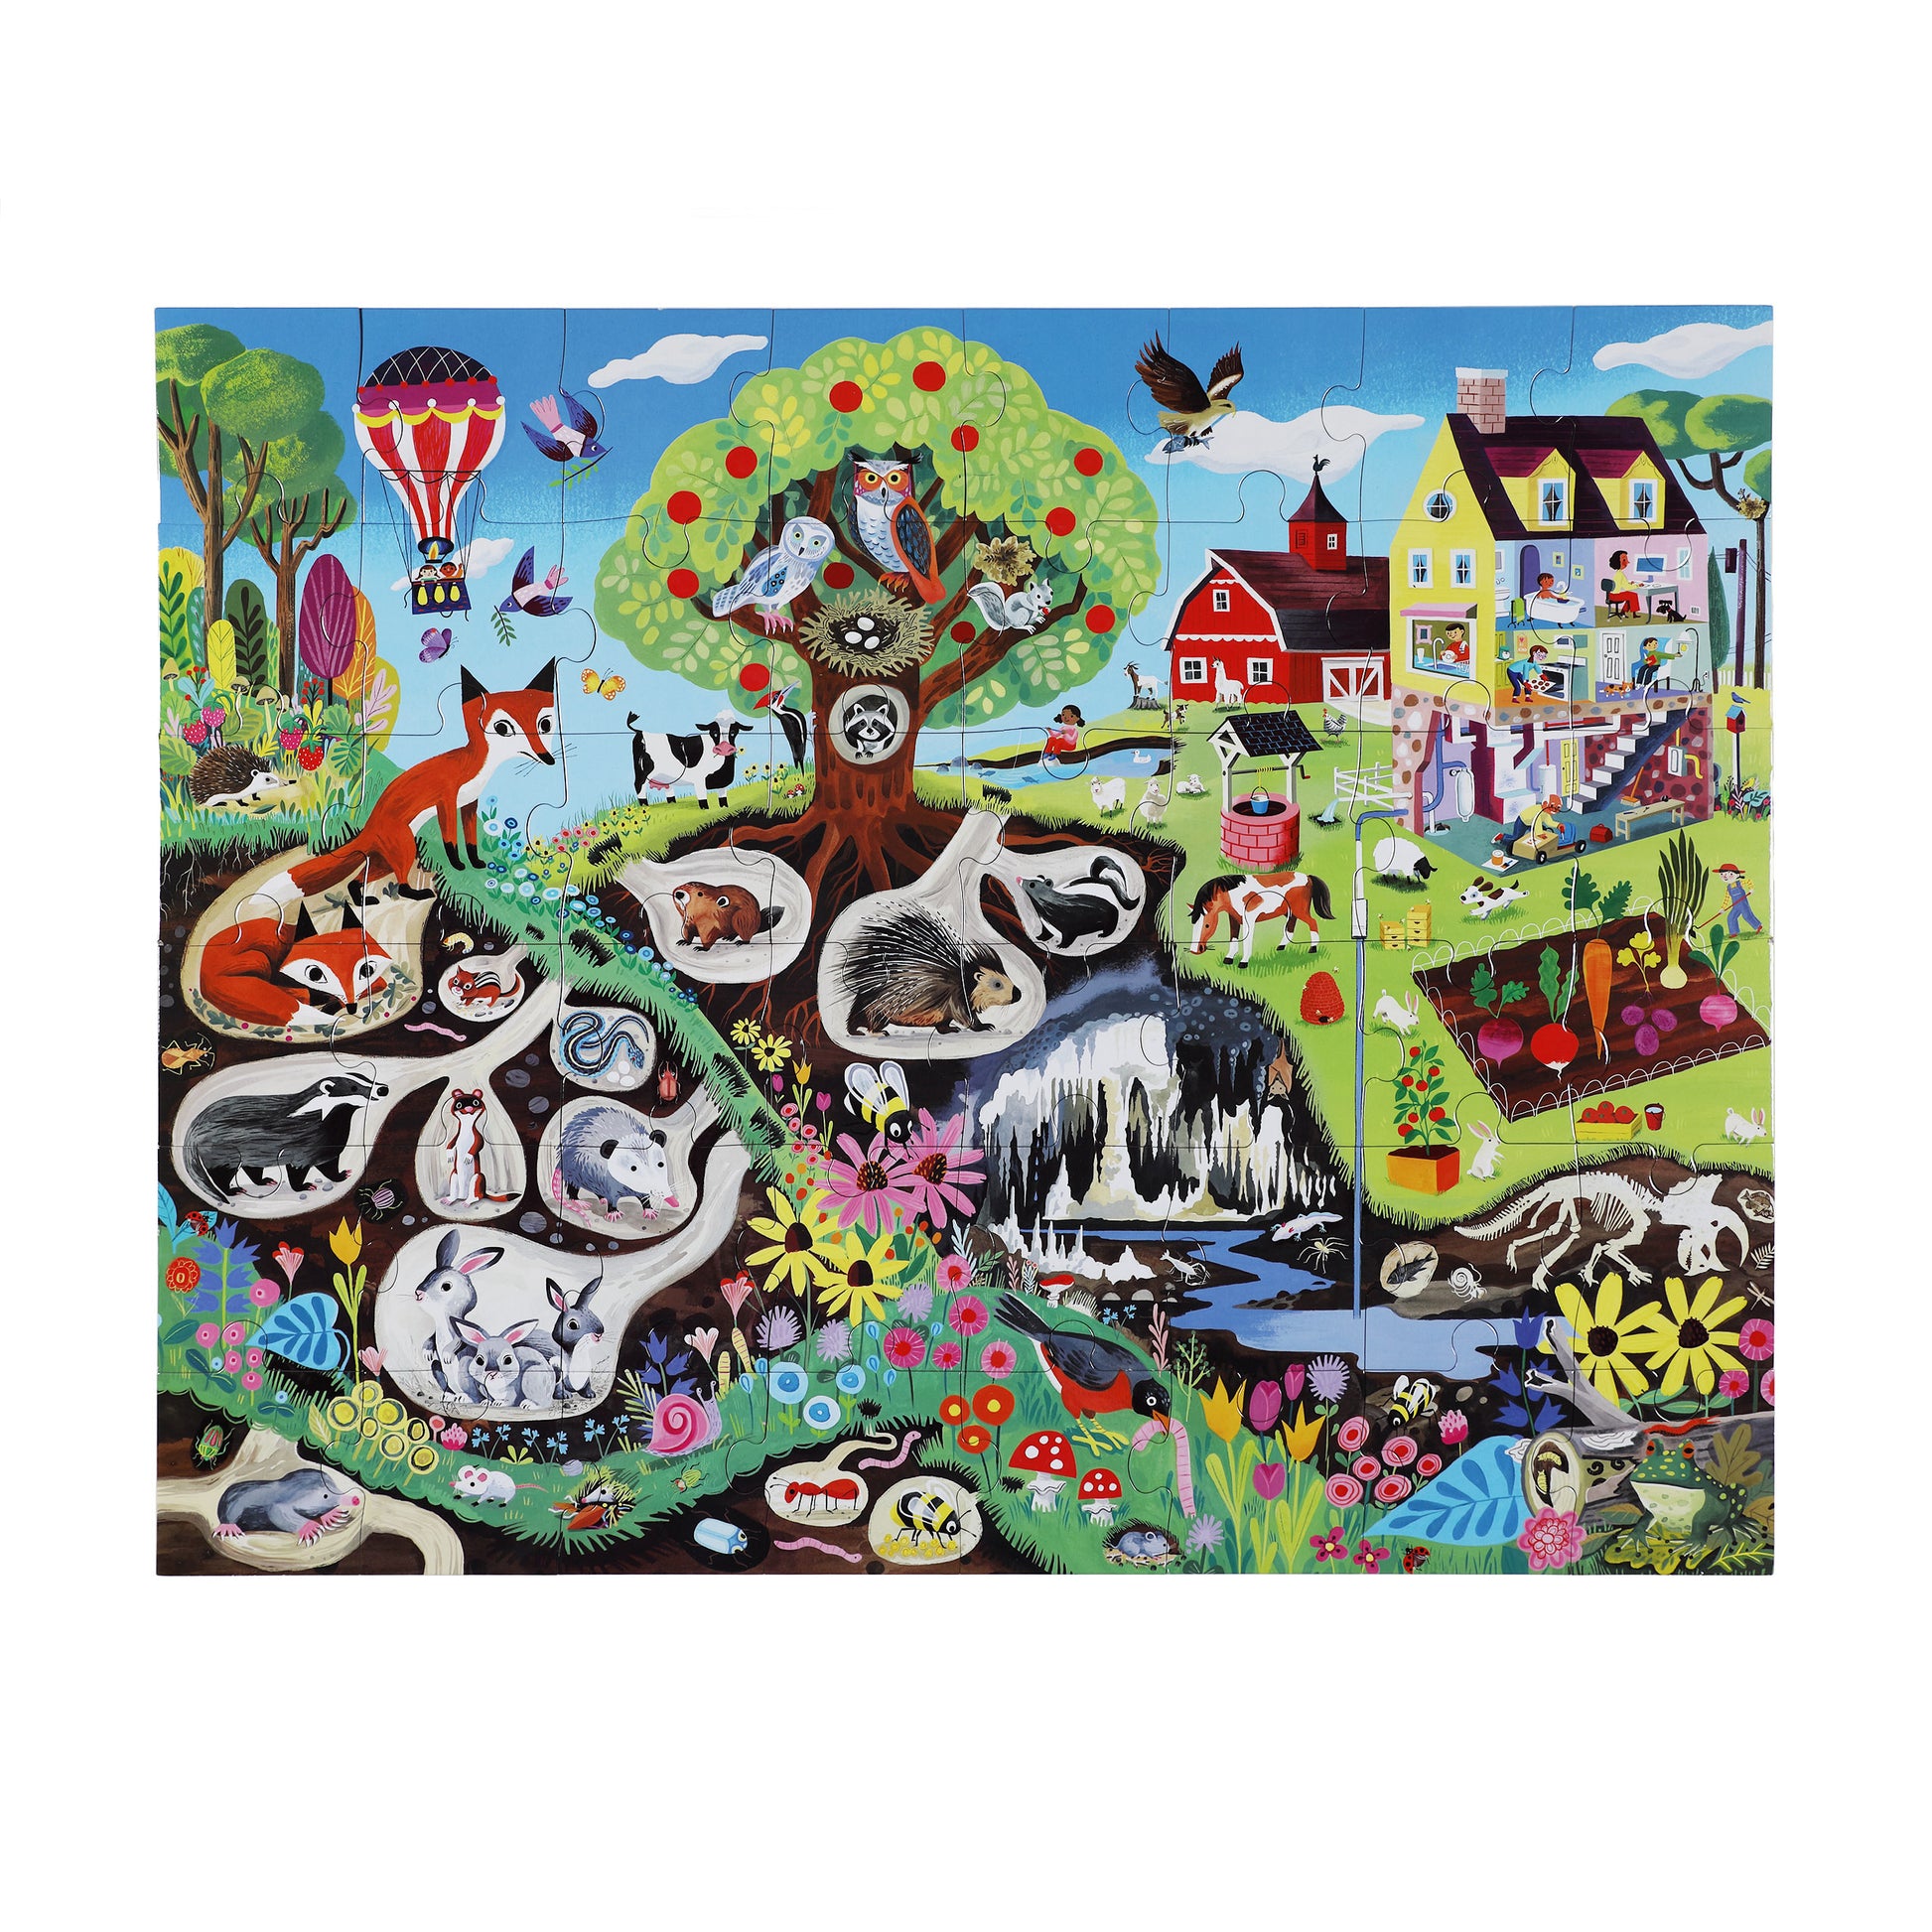 eeBoo Within the Country 48 Piece Giant Floor Puzzle for Kids Ages 4+